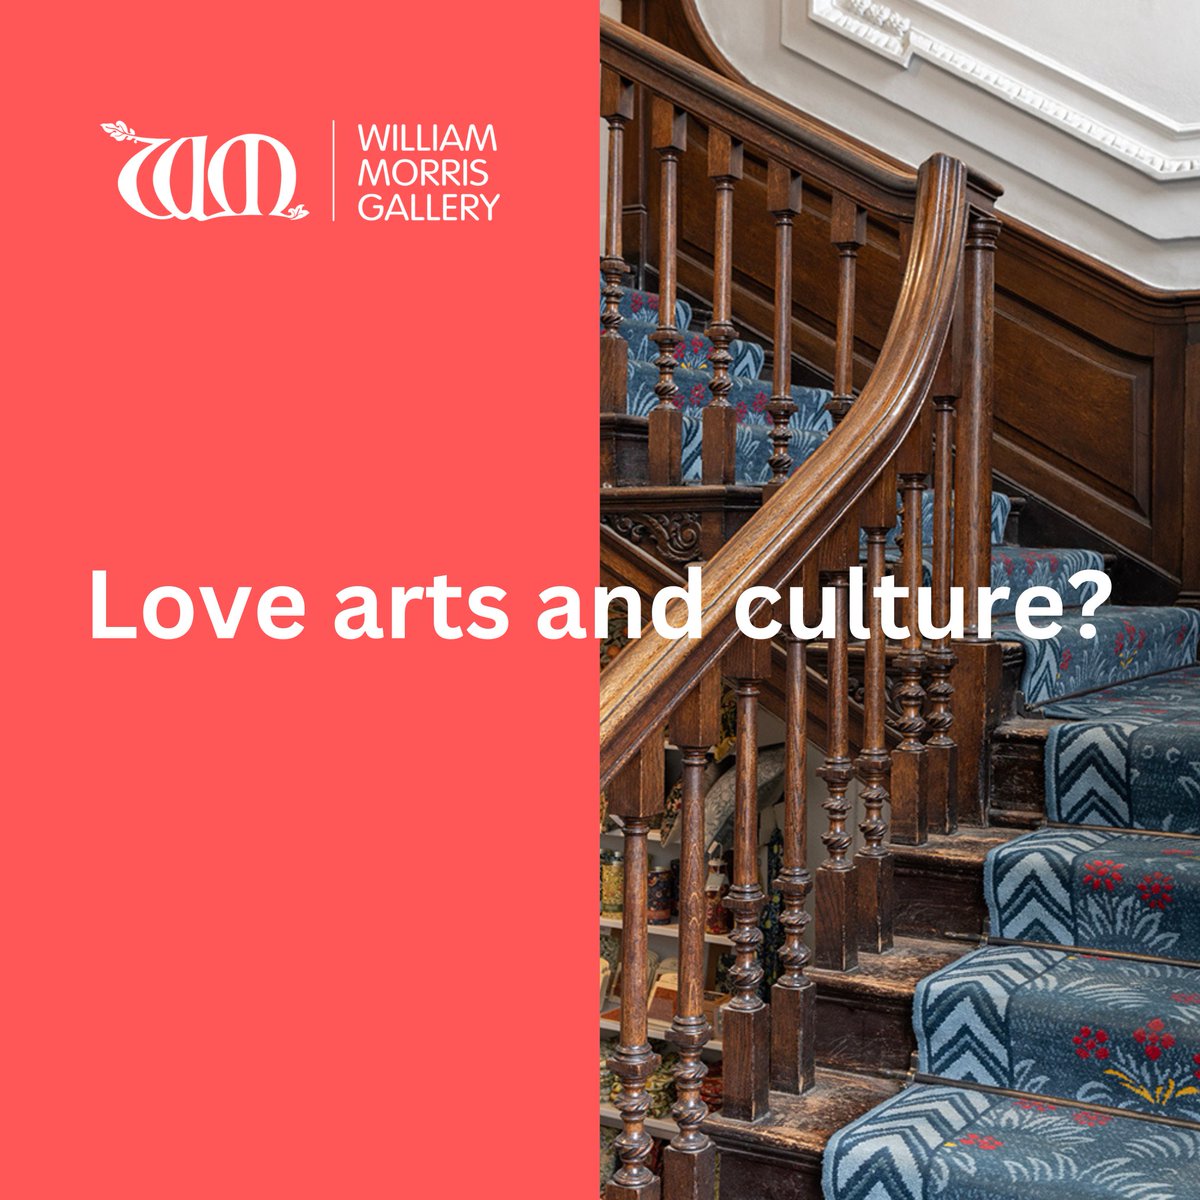 📢 Our Community Advisory Panel application deadline is approaching! Interested in joining? This panel gives local people the opportunity to help shape the creative programme and wider activities at the Gallery. Apply by Sunday 7 April: bit.ly/3TzLiBQ